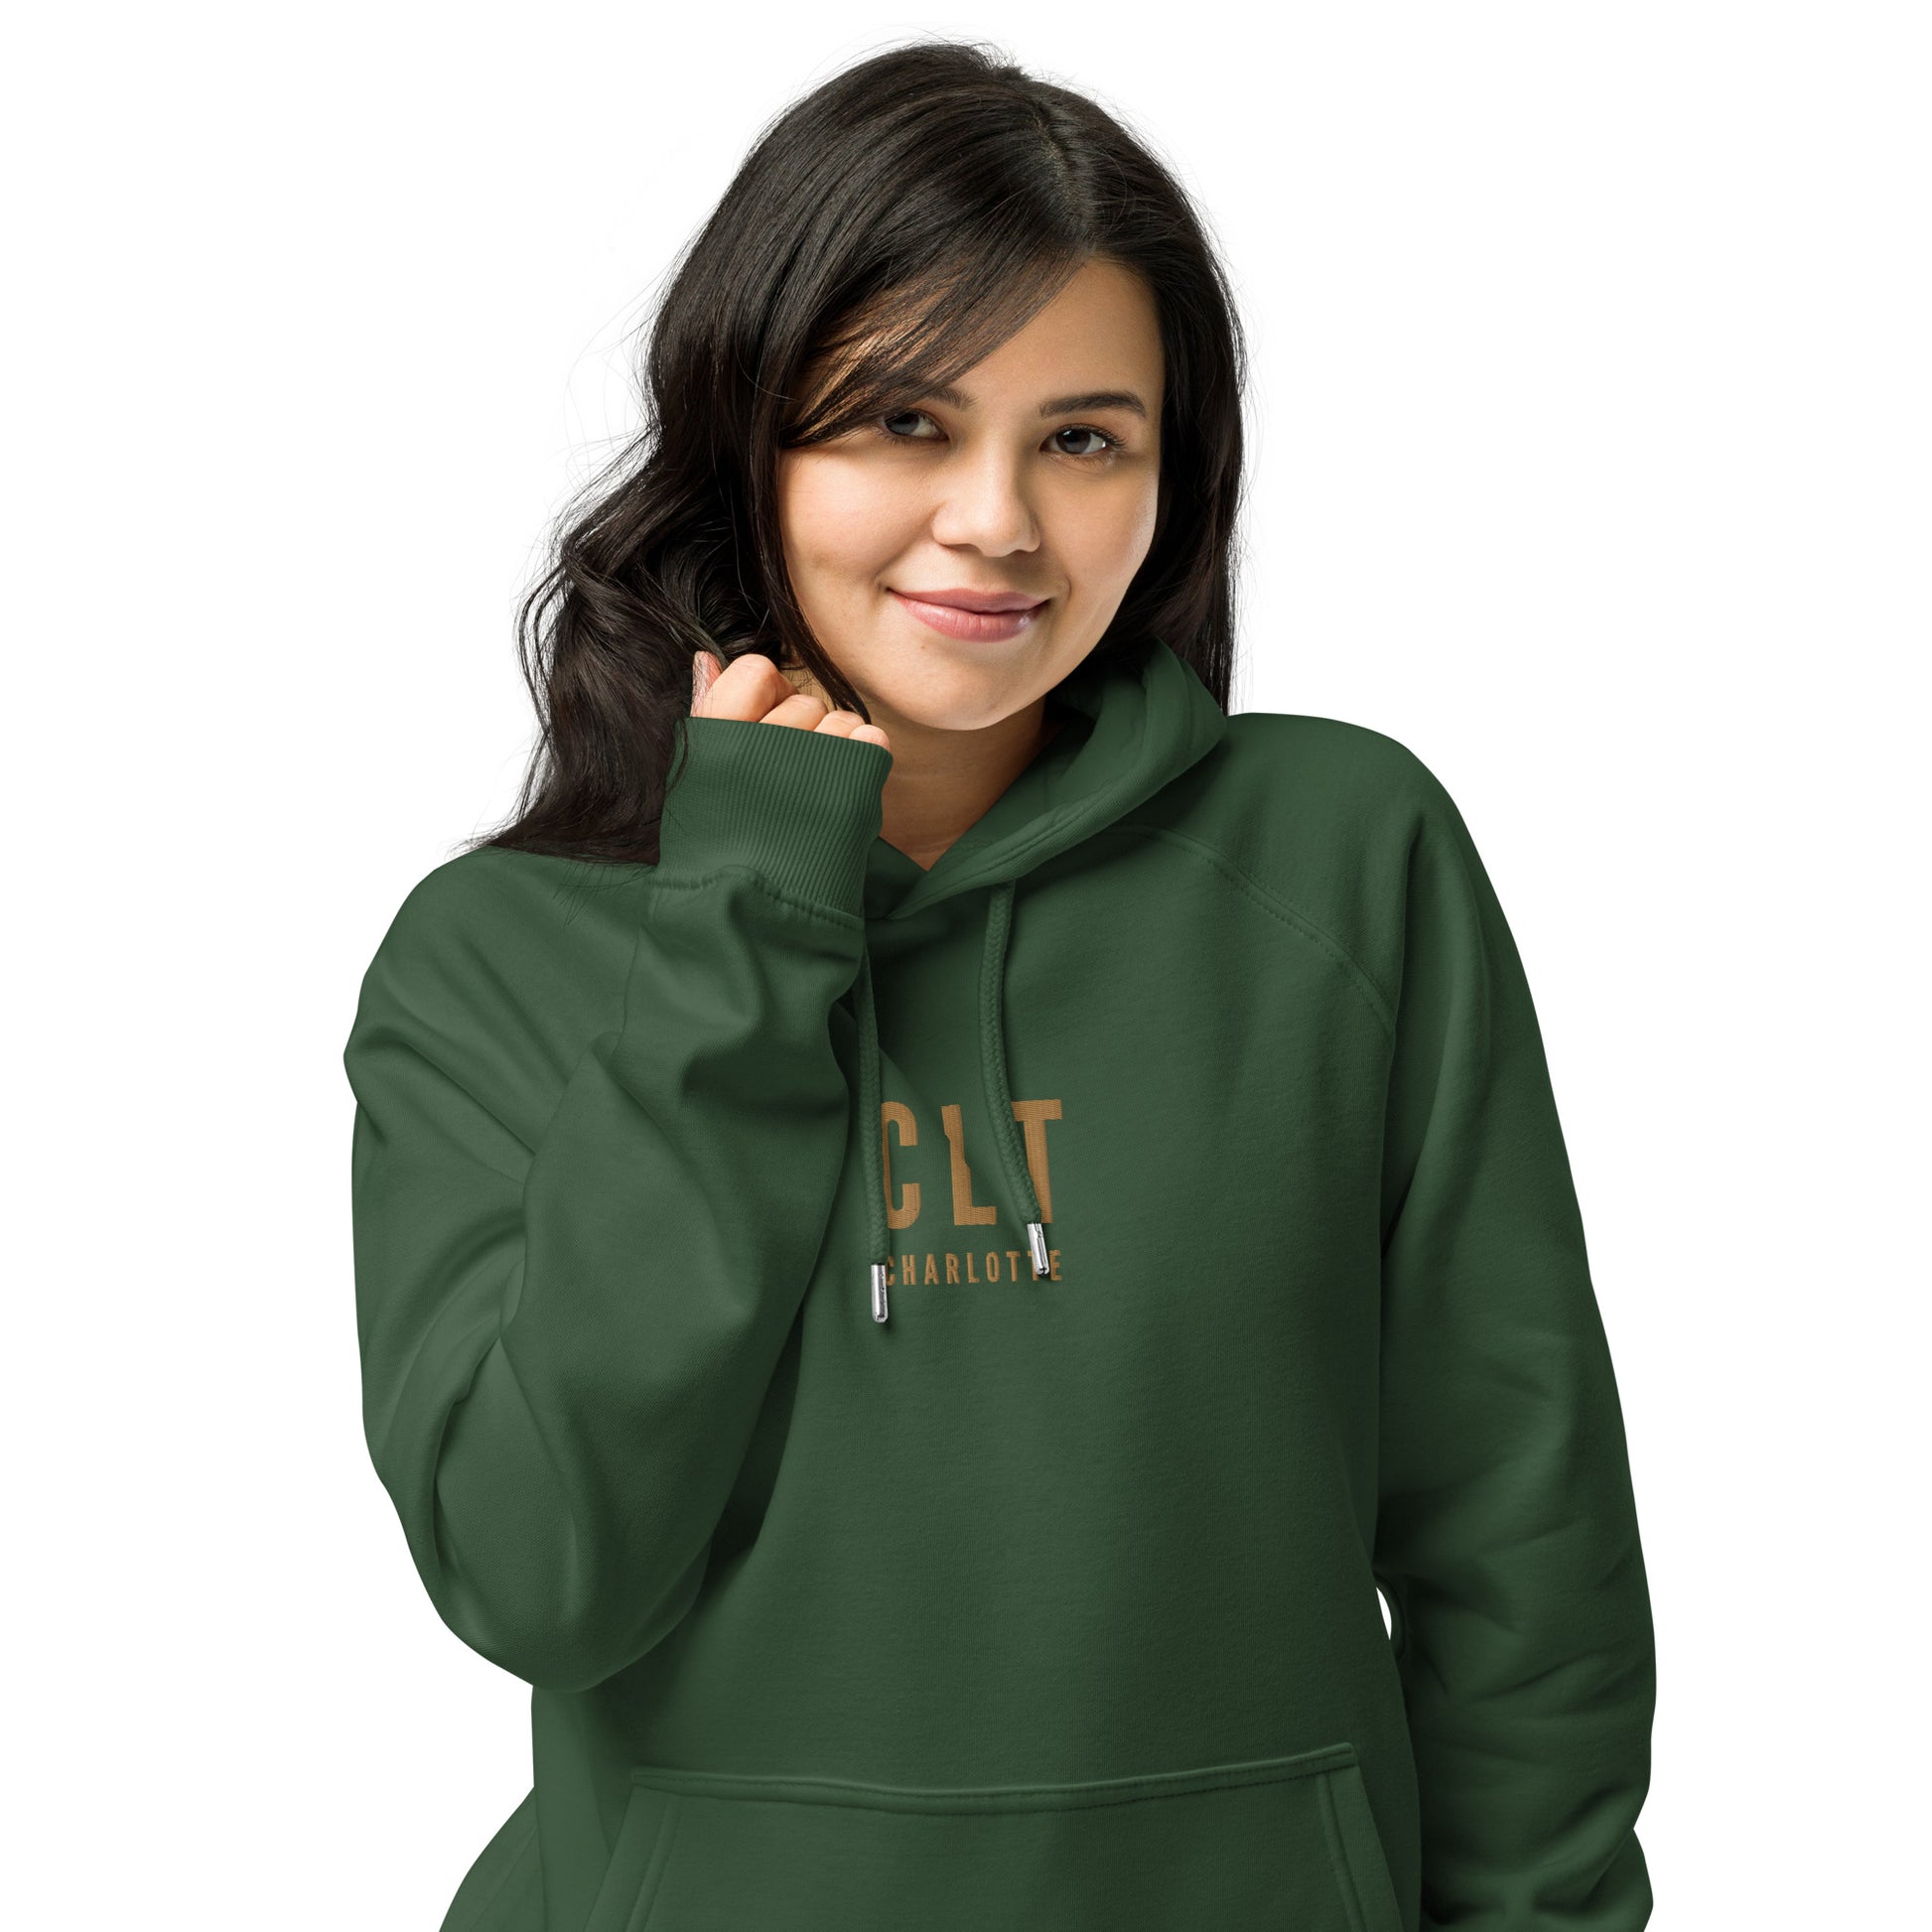 City Organic Hoodie - Old Gold • CLT Charlotte • YHM Designs - Image 03